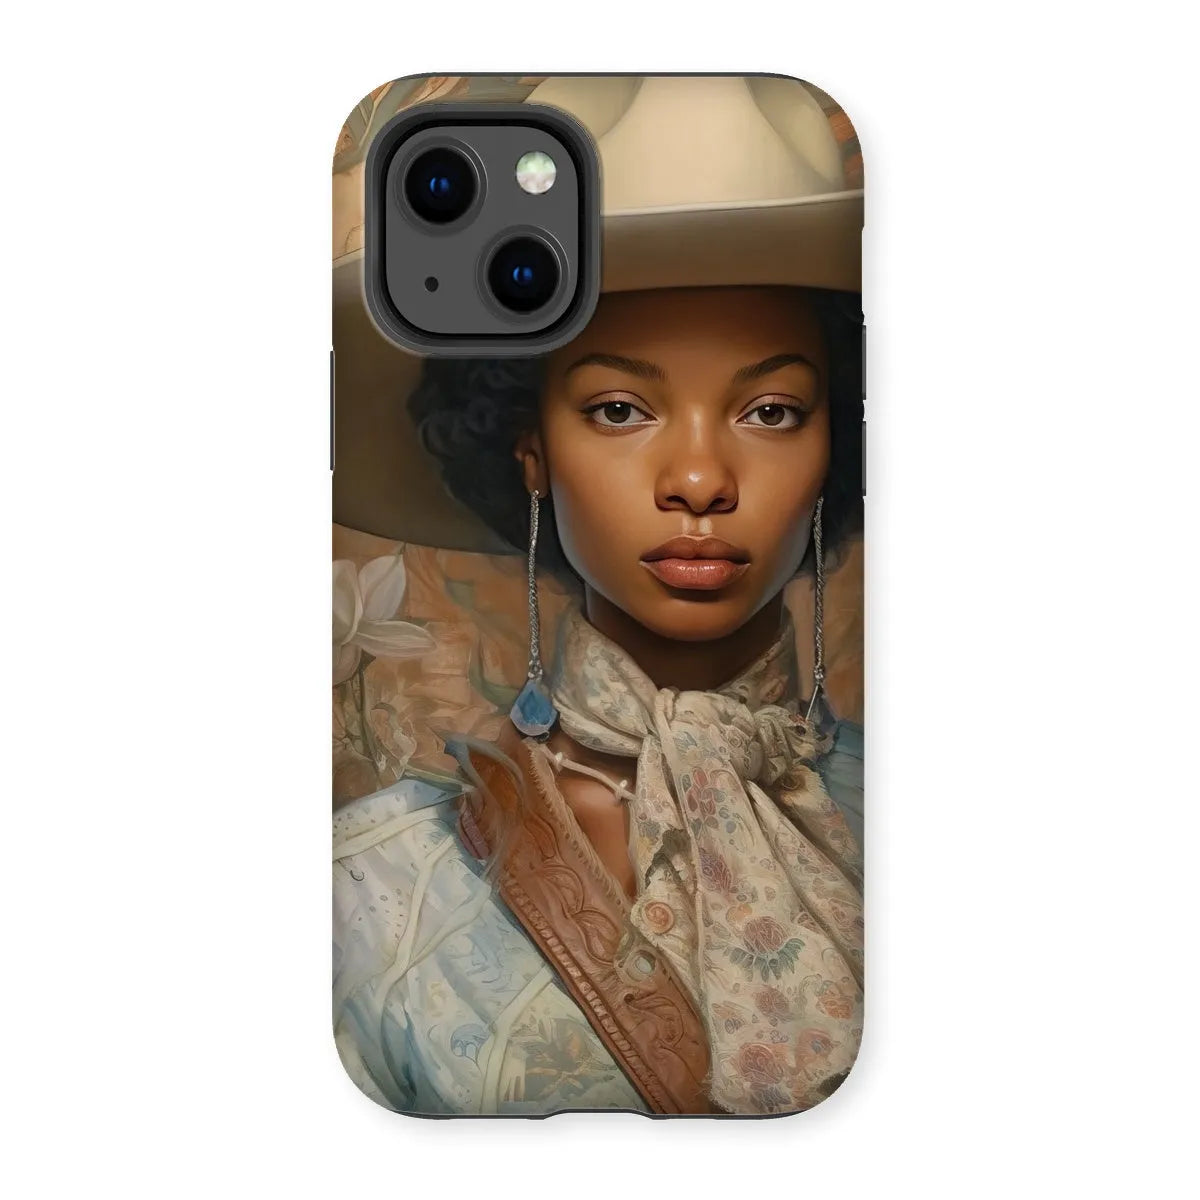 Imani The Lesbian Cowgirl - Sapphic Art Phone Case - Iphone 13 / Matte - Mobile Phone Cases - Aesthetic Art